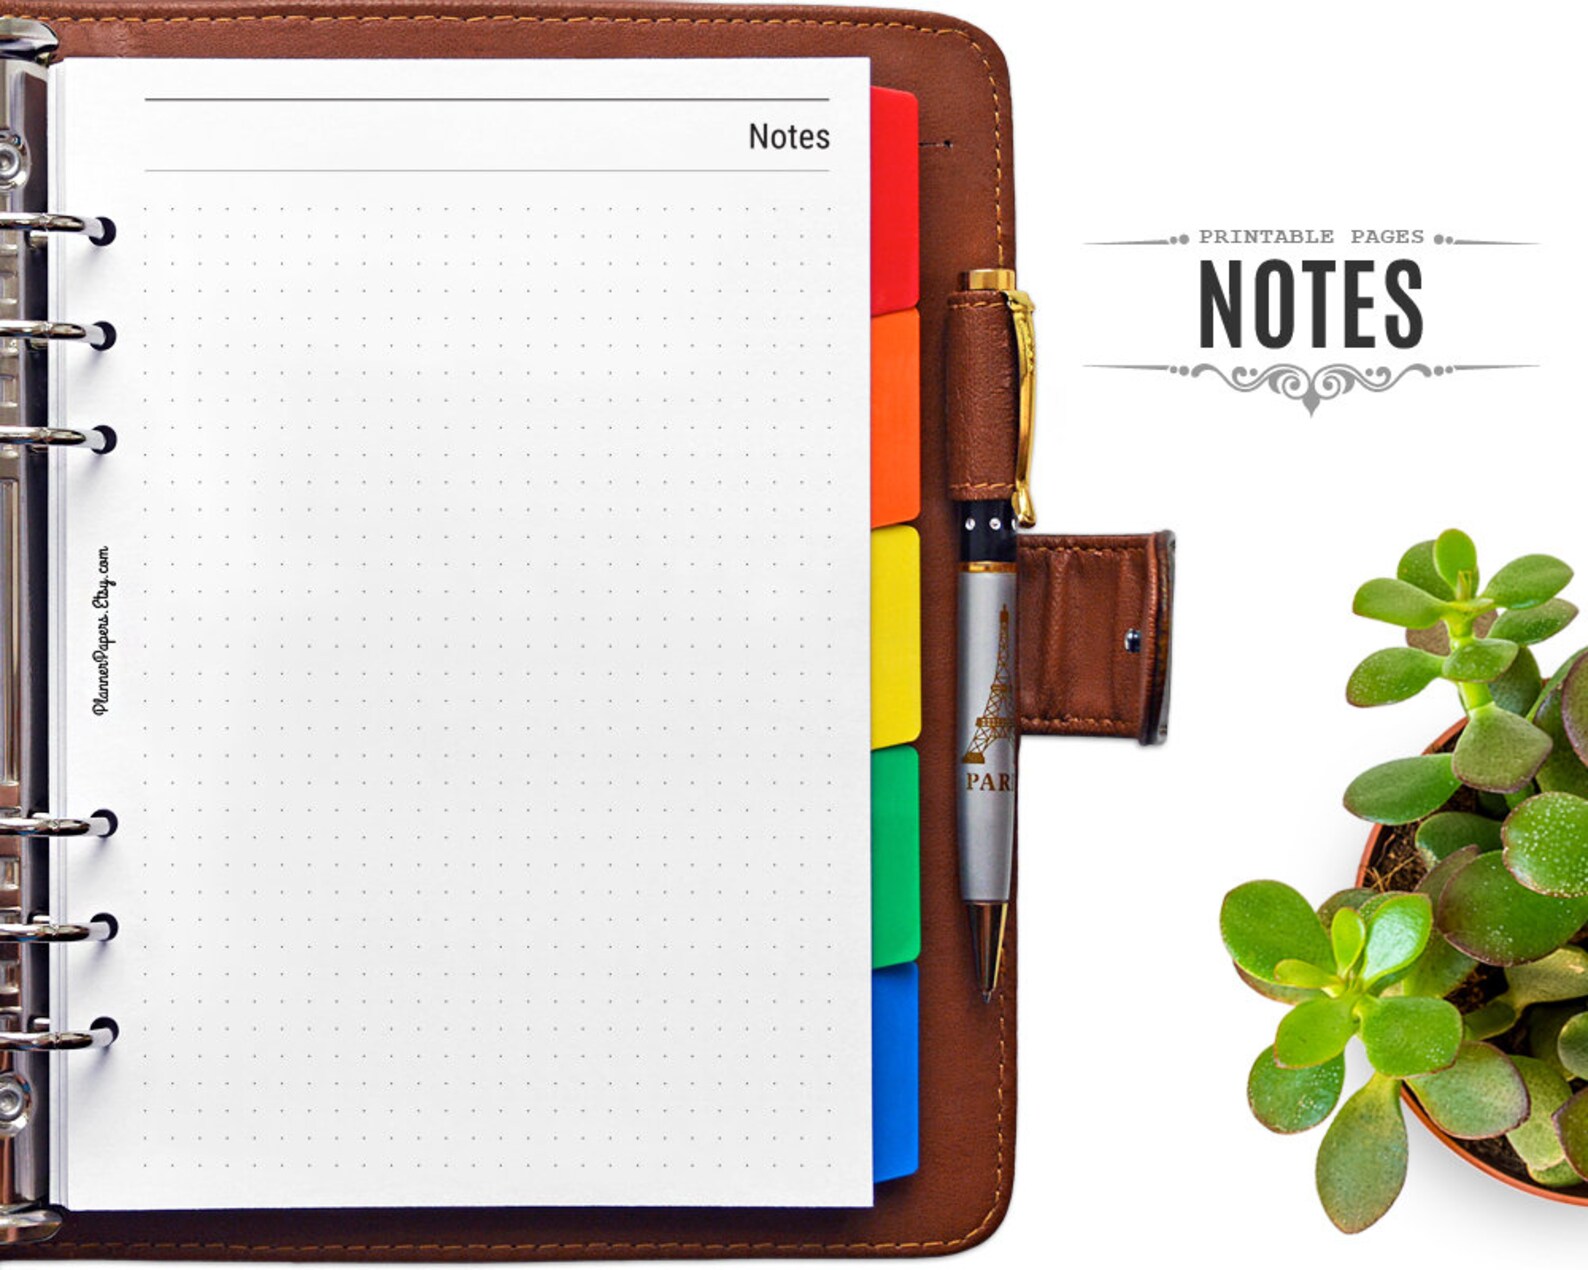 Note page. Notes Printable. Notes Grid.